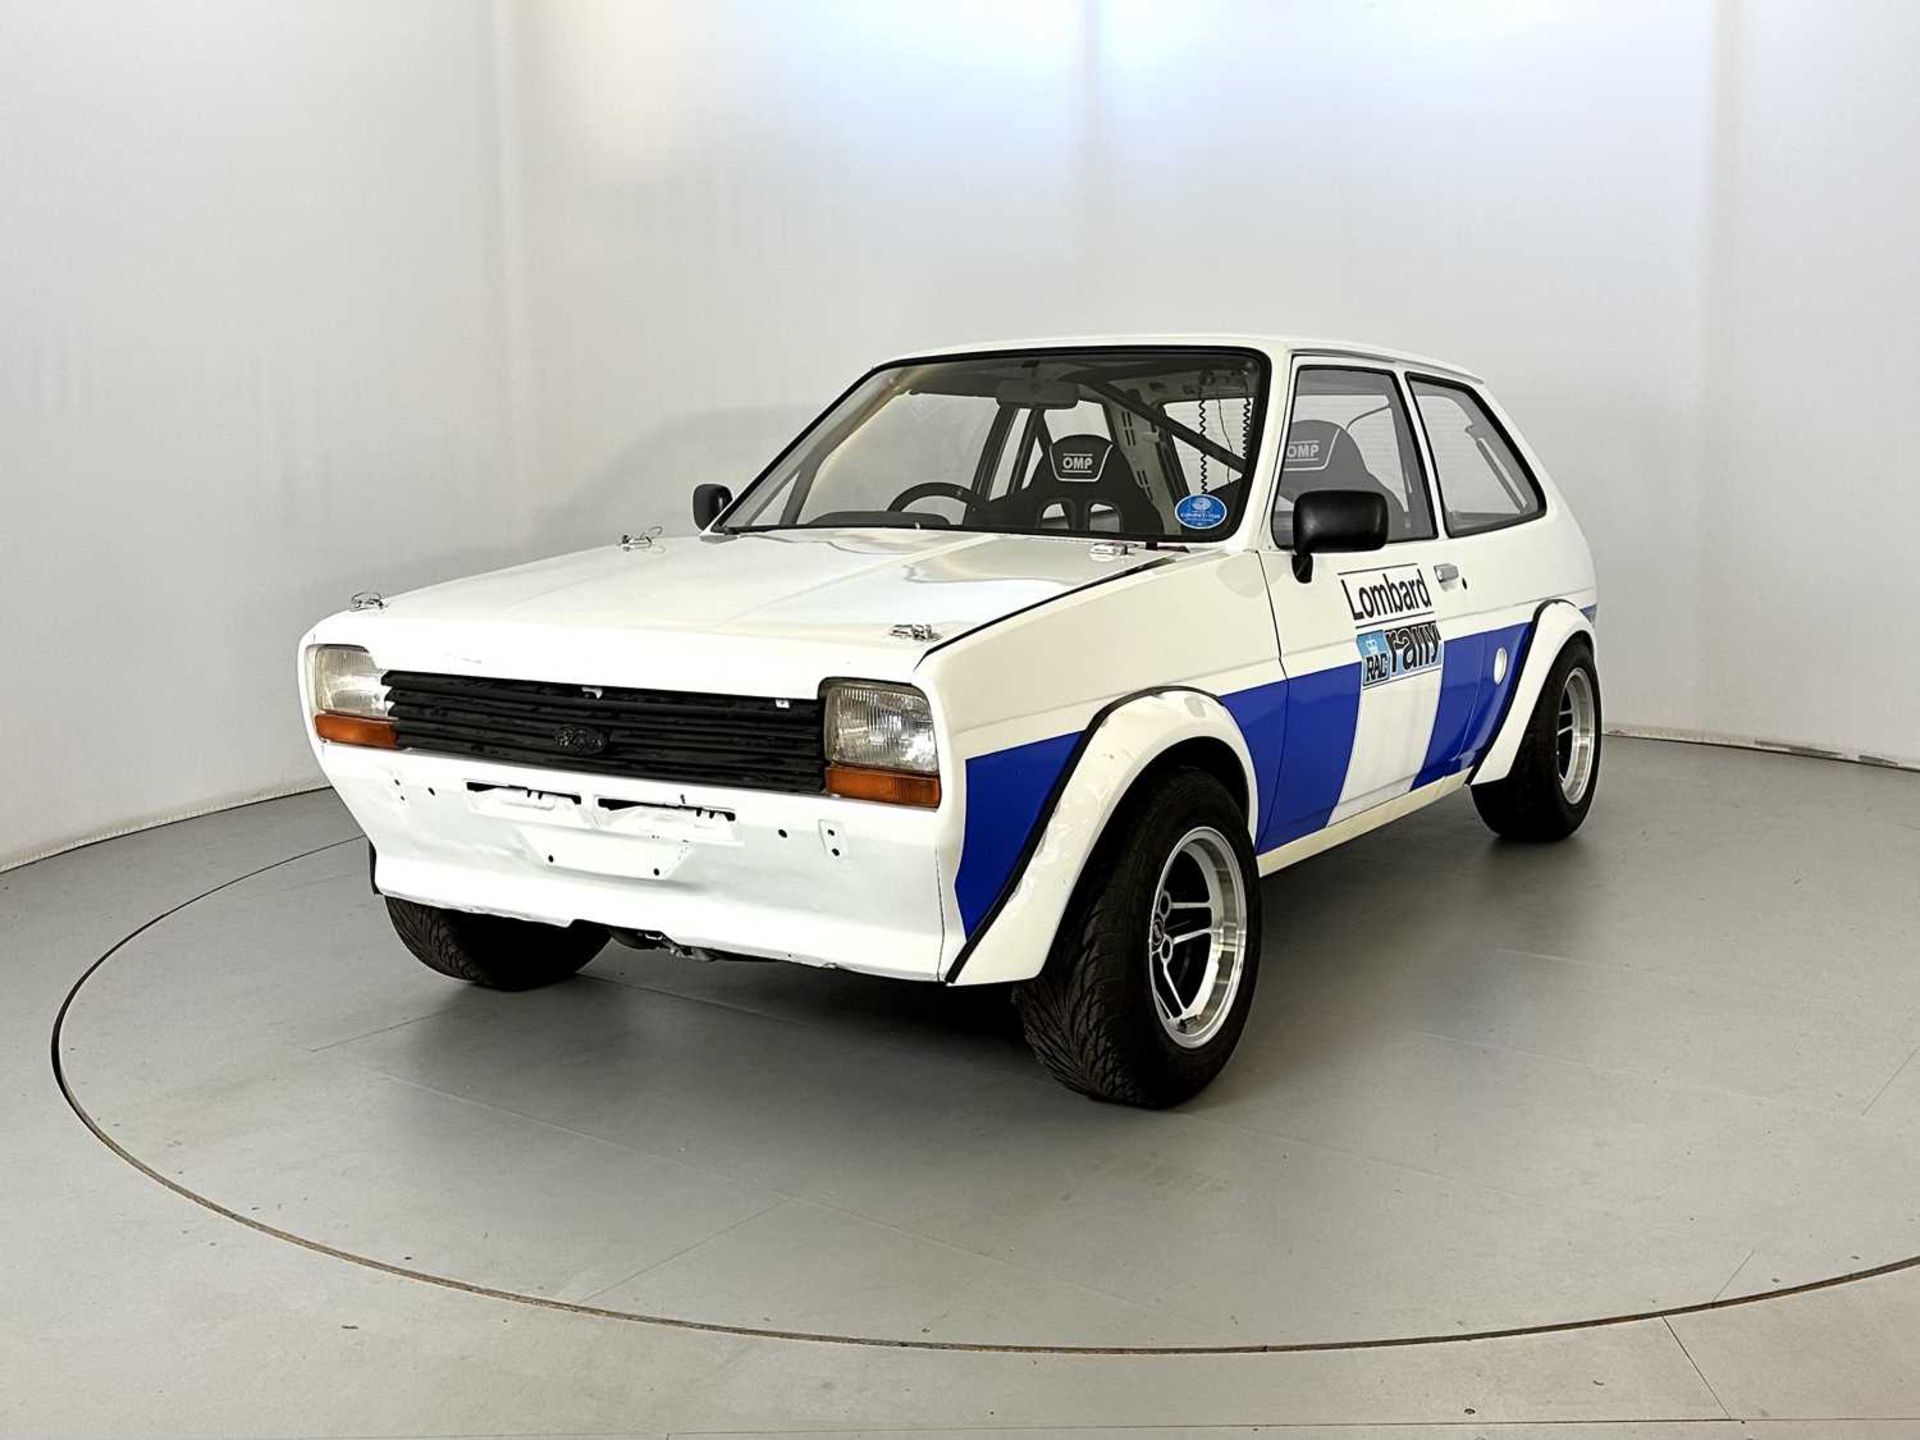 1983 Ford Fiesta XR2 - Image 3 of 28